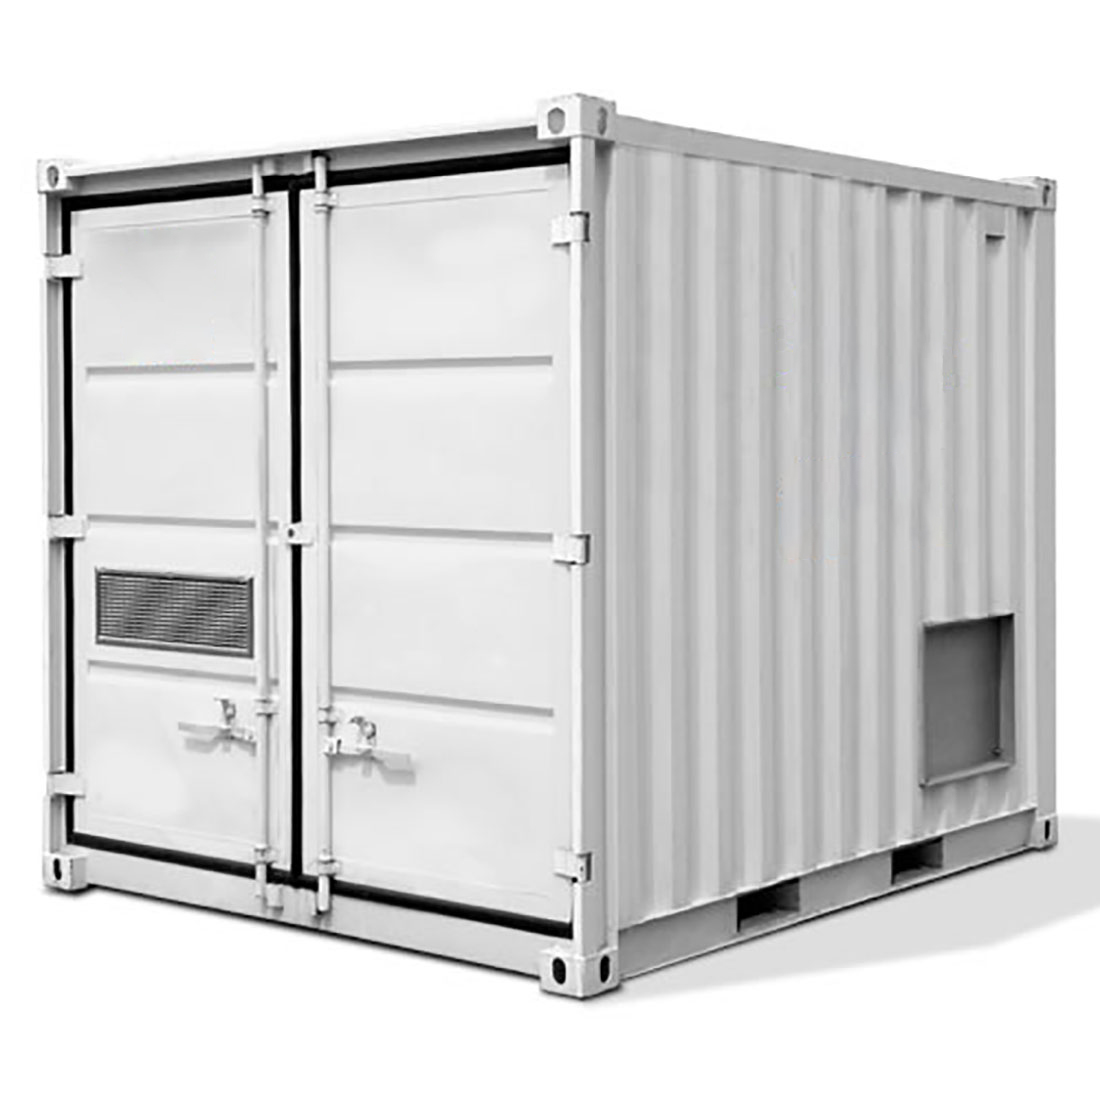 350kW Containerised Boiler